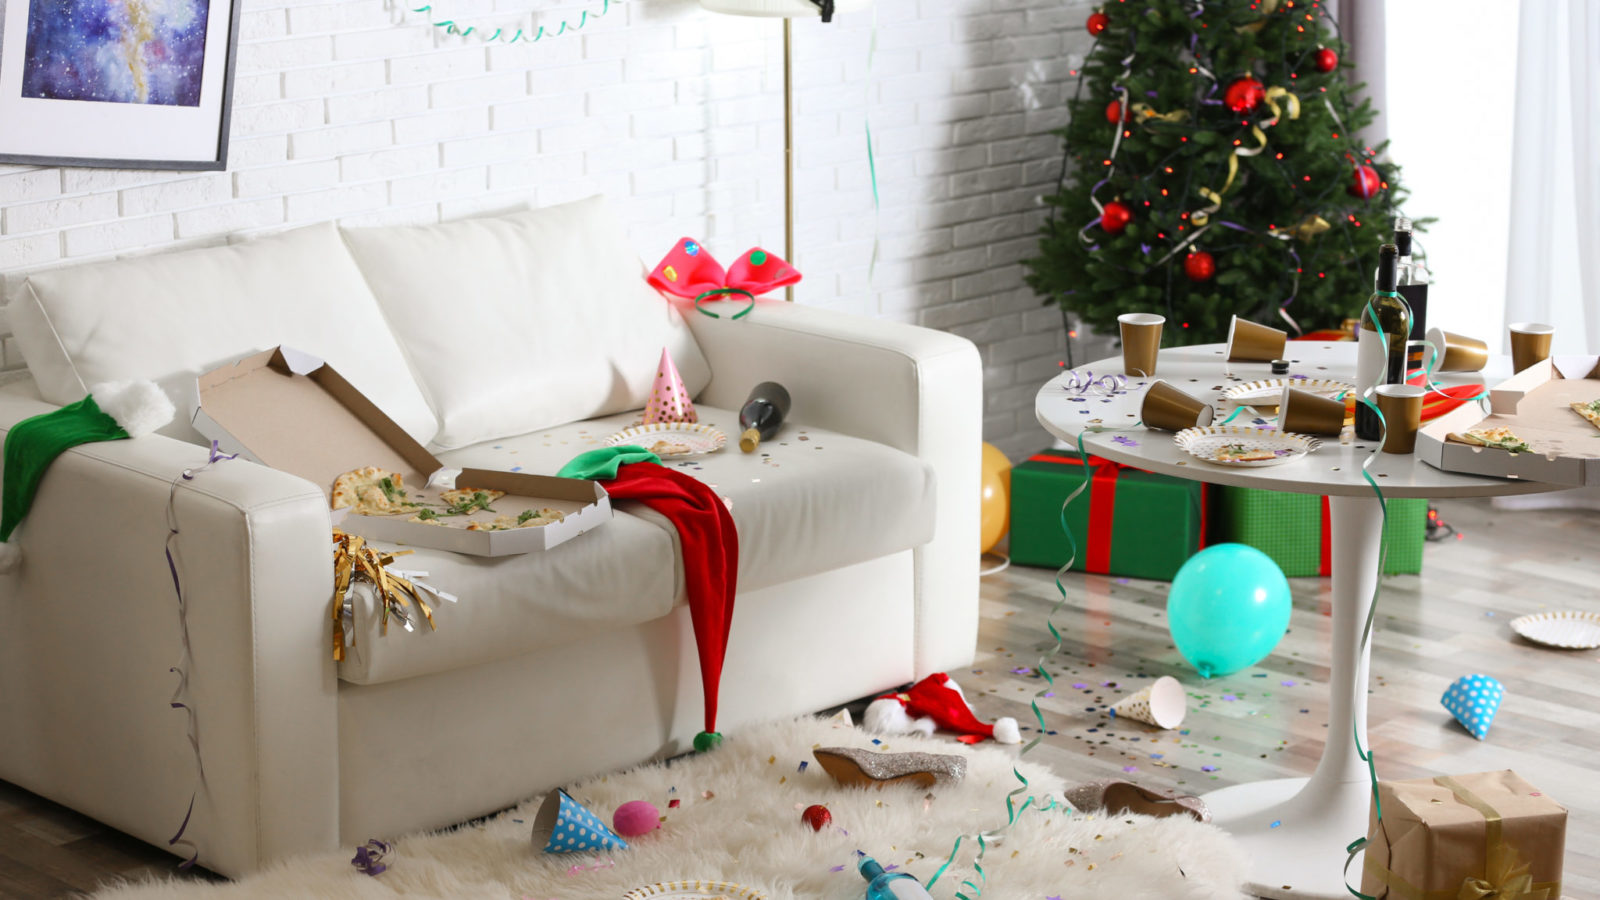 Messy living room interior with Christmas tree